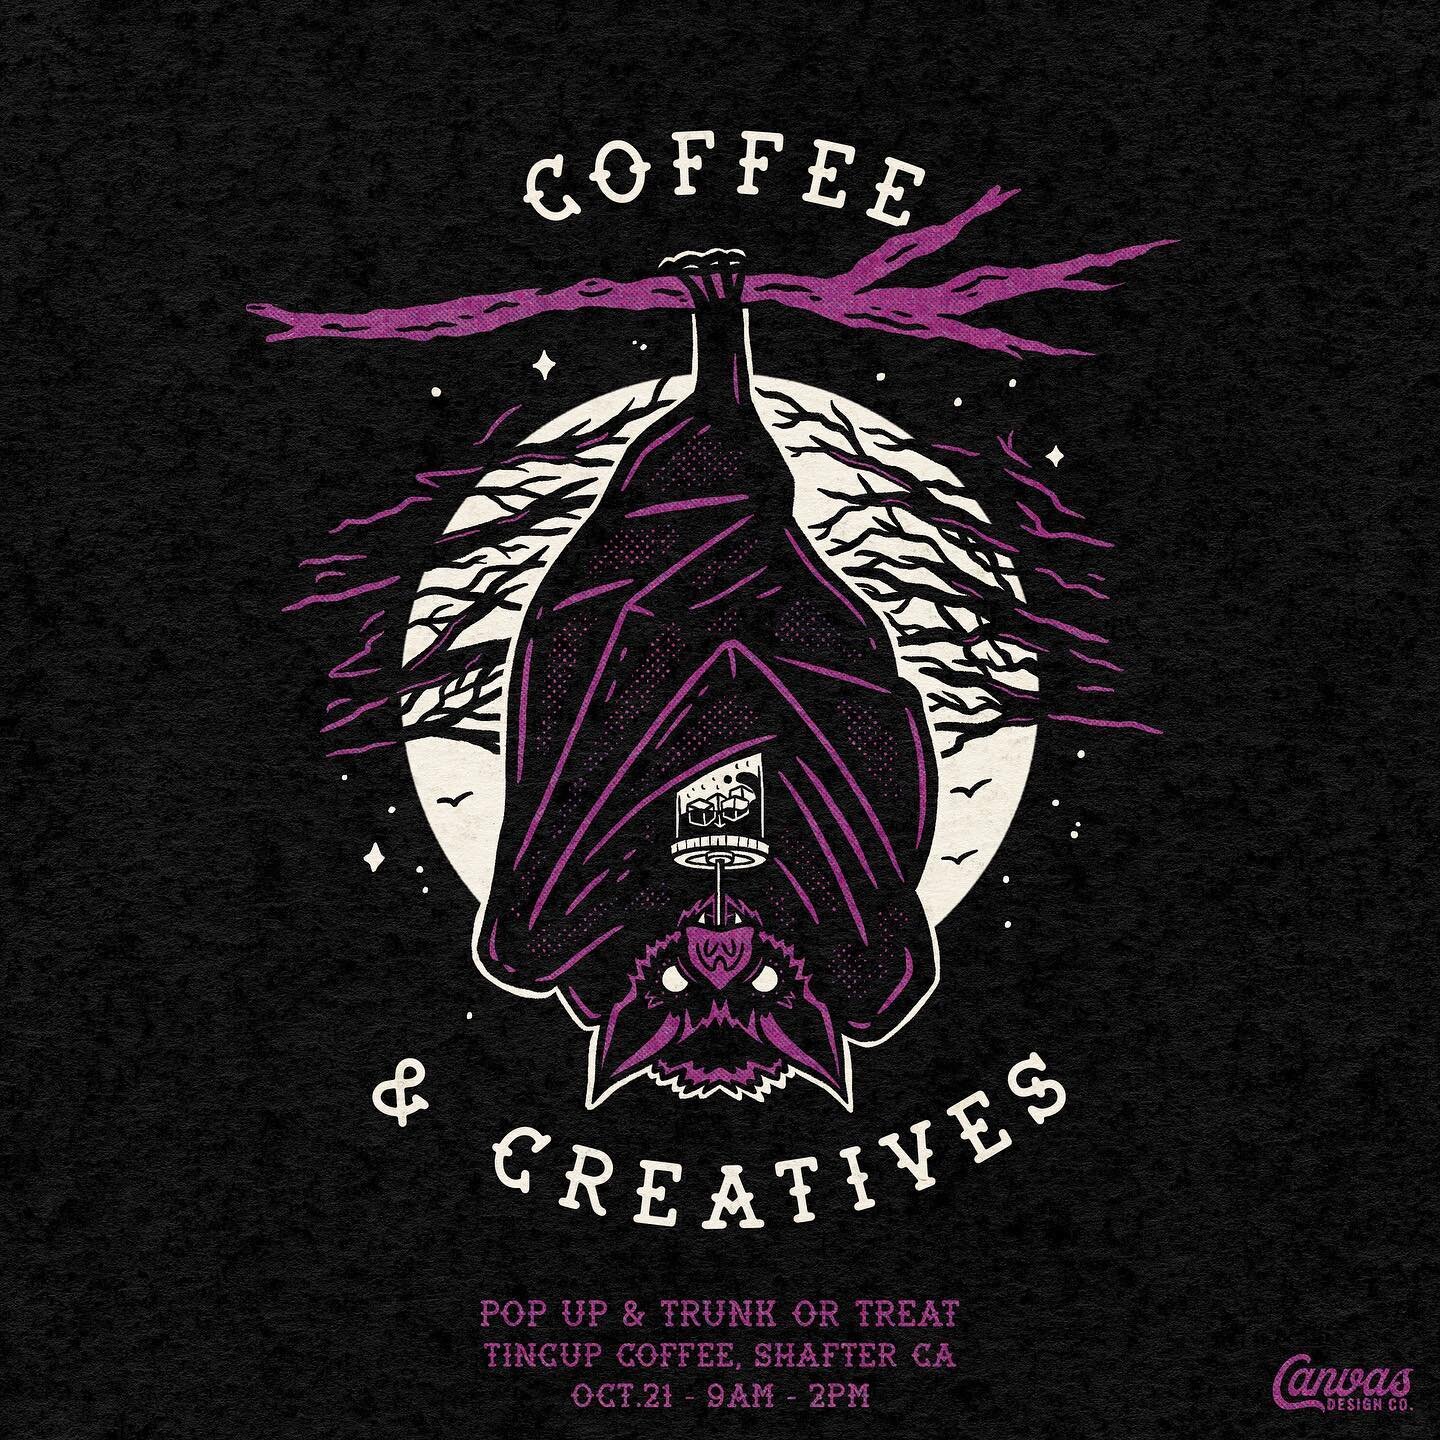 Popping up shop at @tincupcoffeeshafter this Saturday for their Coffee &amp; Creatives event! Tons of vendors and Trunk or Treaters. It&rsquo;s going to be a great time!
We&rsquo;ll be popped up and ready will stickers, shirts, hats, and more. Hope t